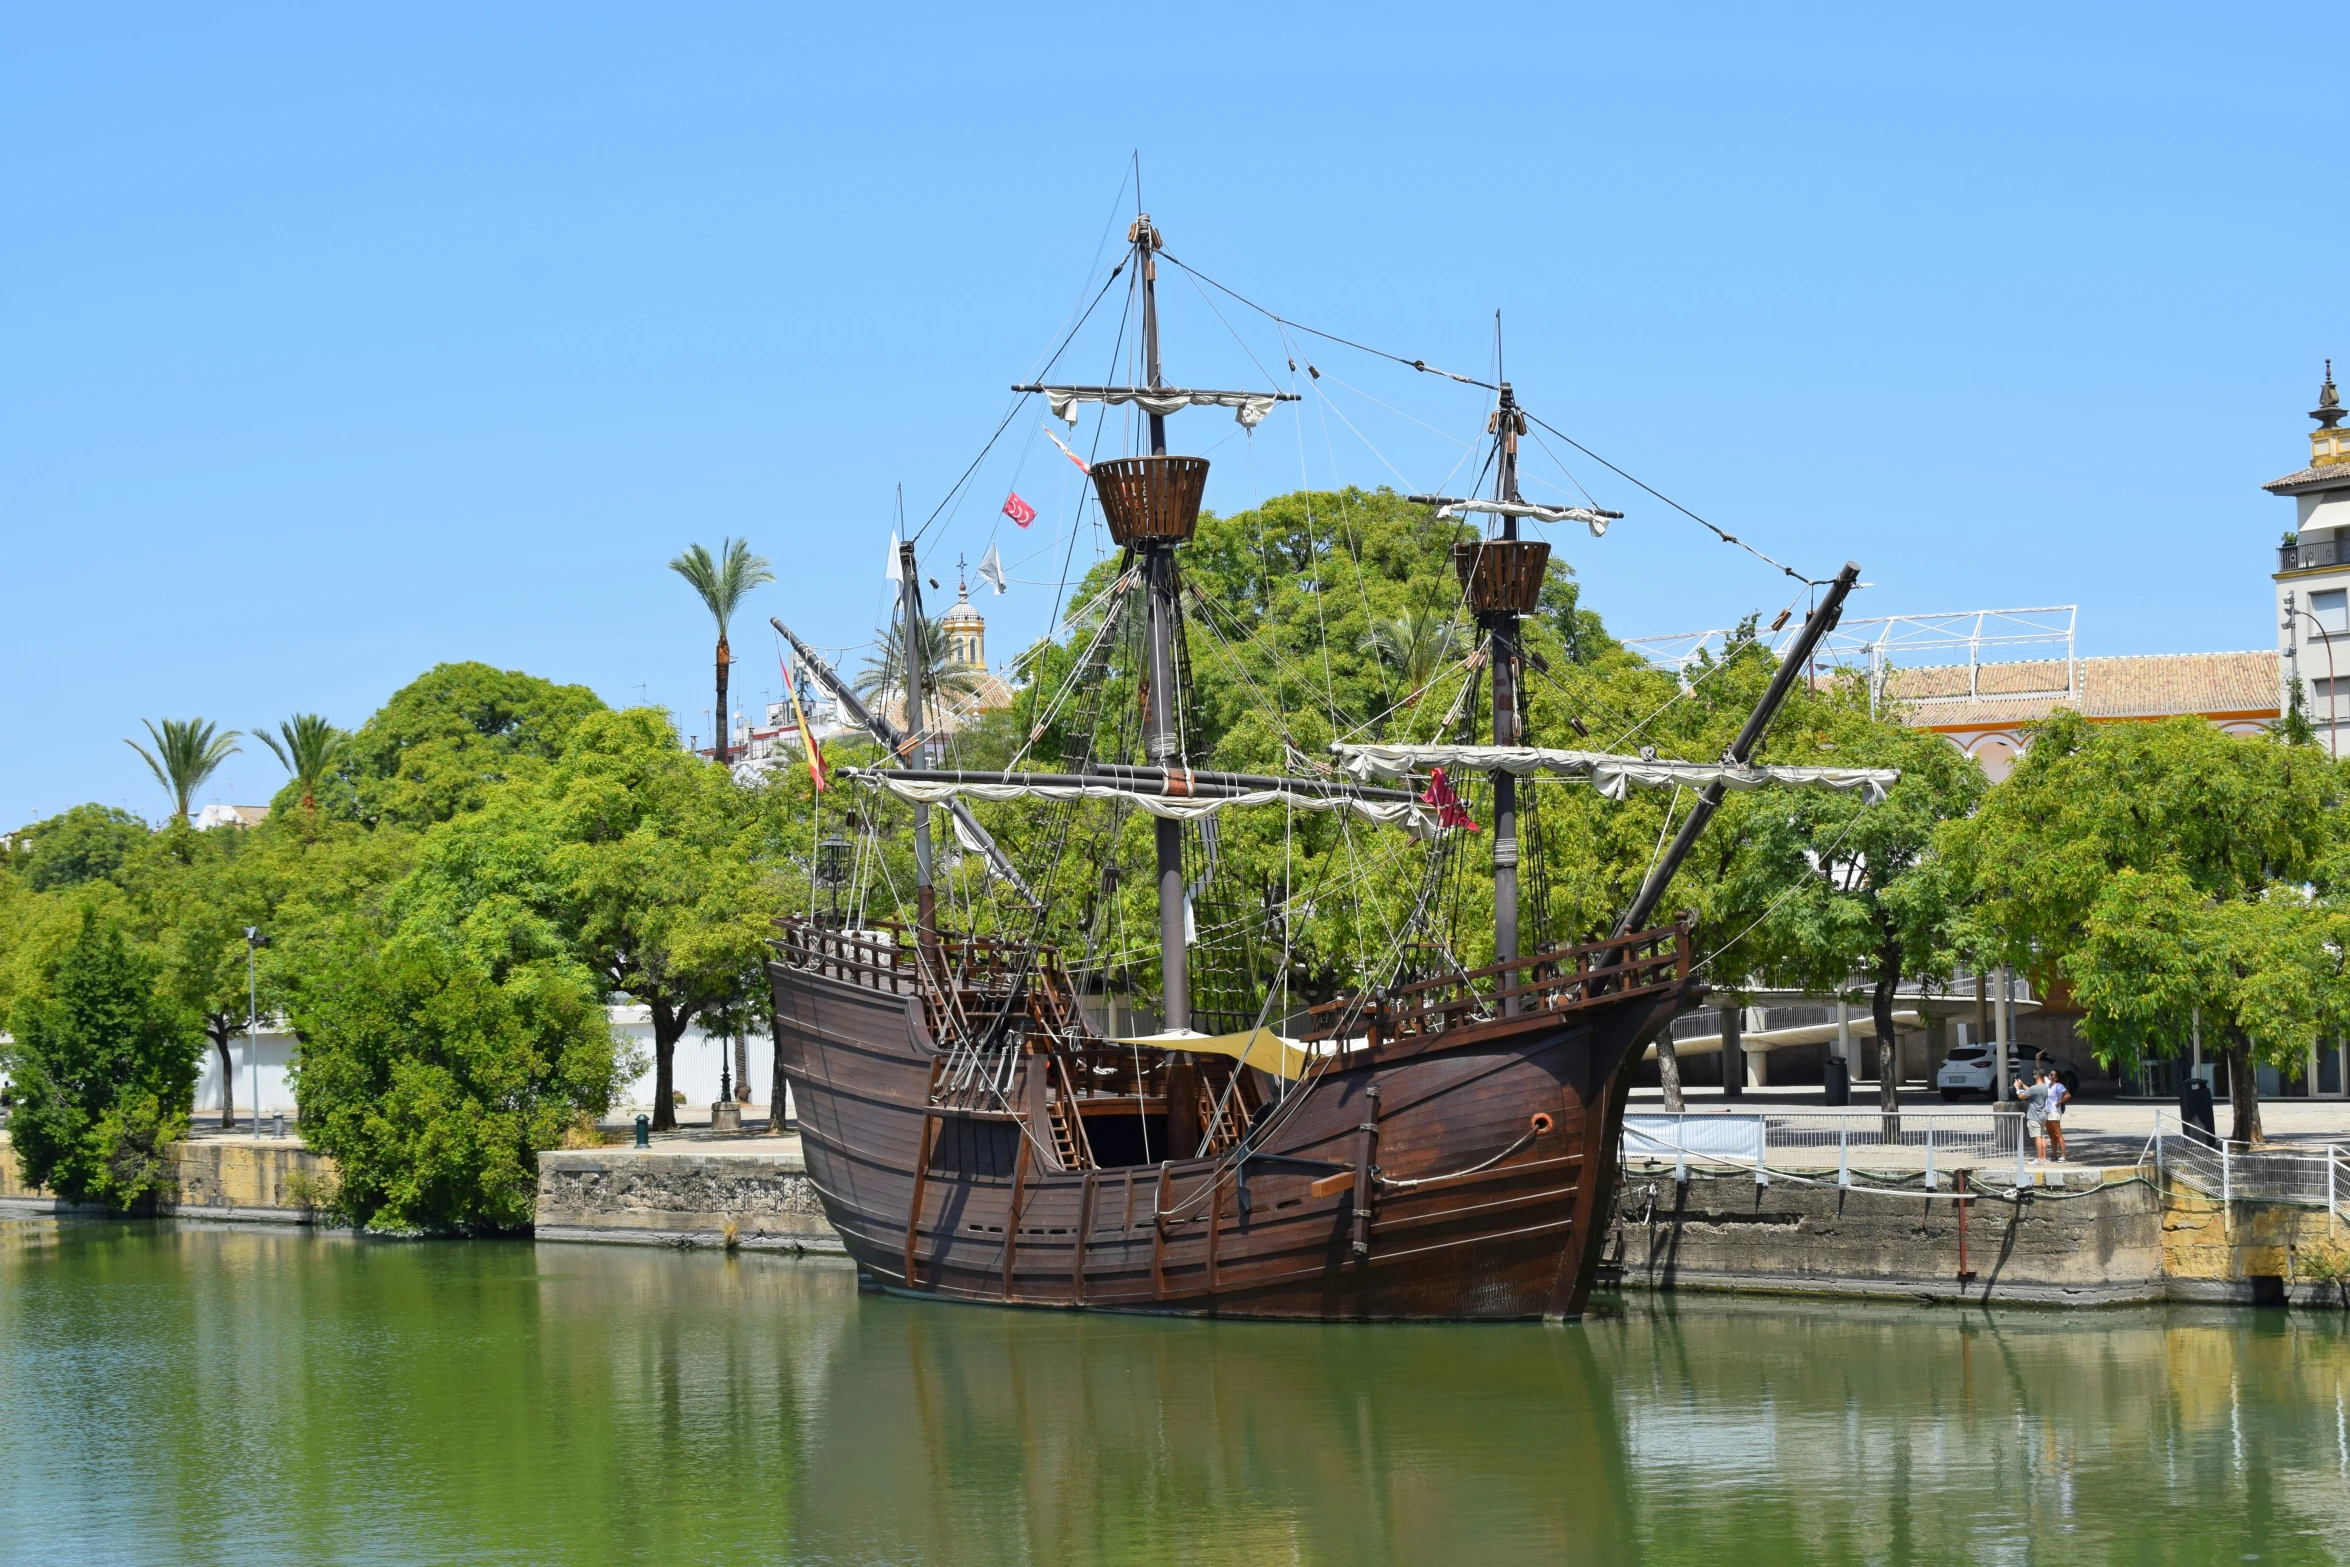 a replica ship sitting in the middle of some water